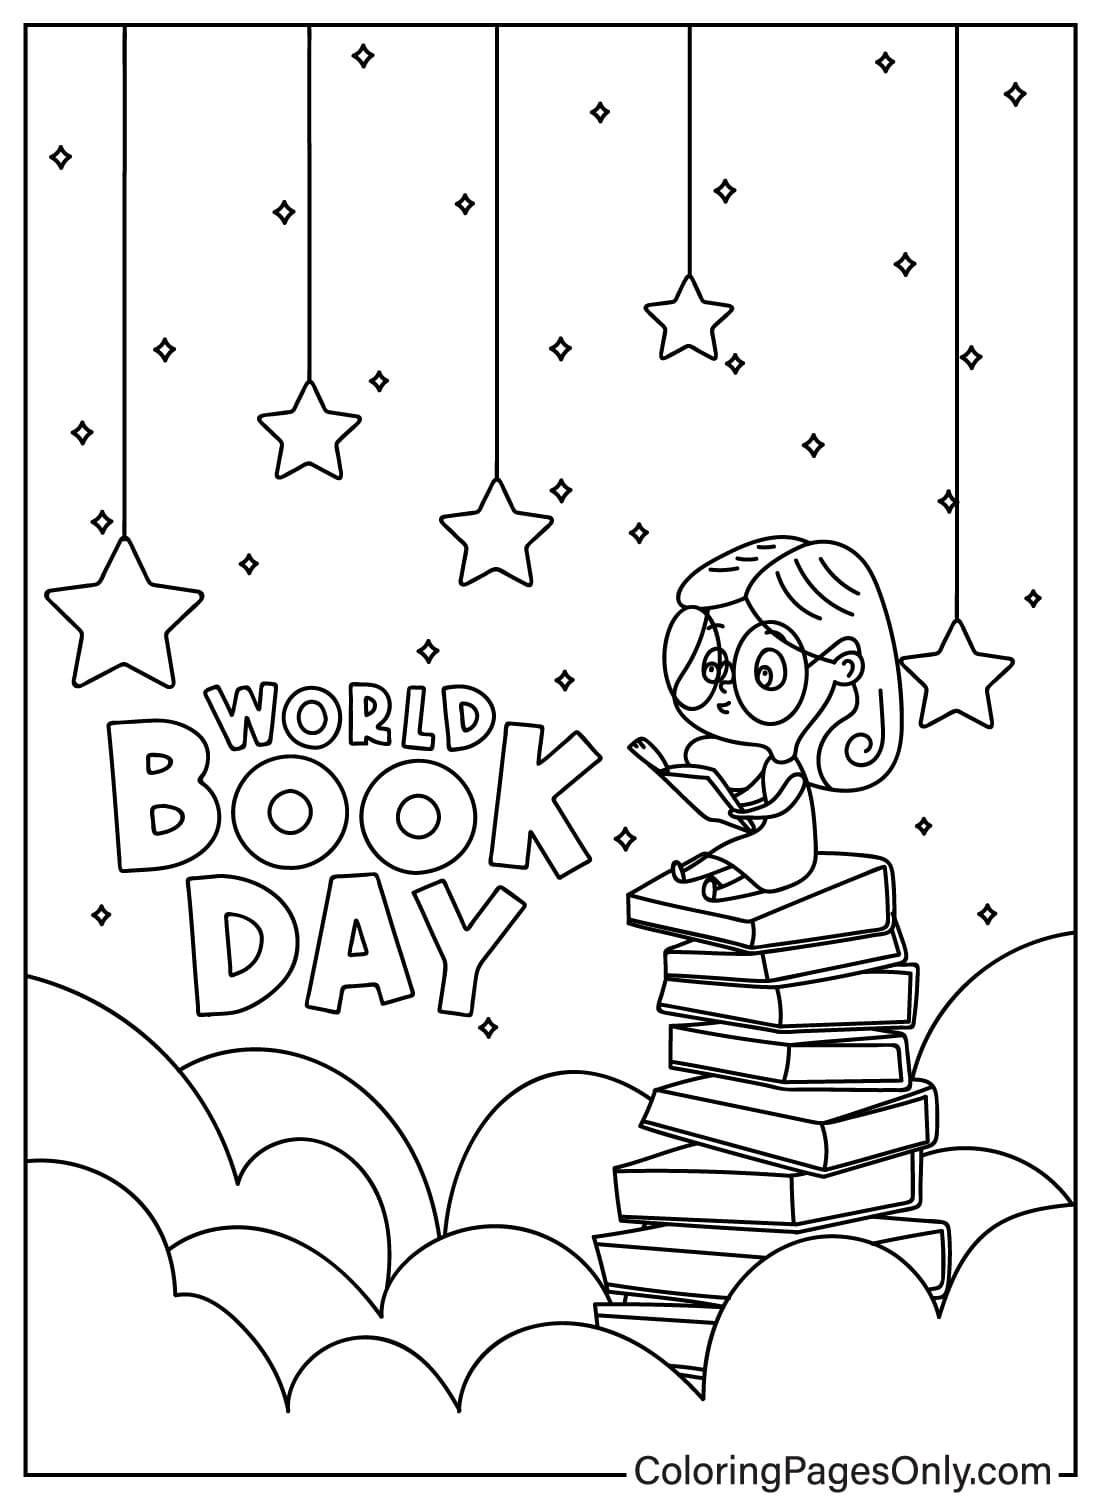 World Book Day Images to Color from World Book Day